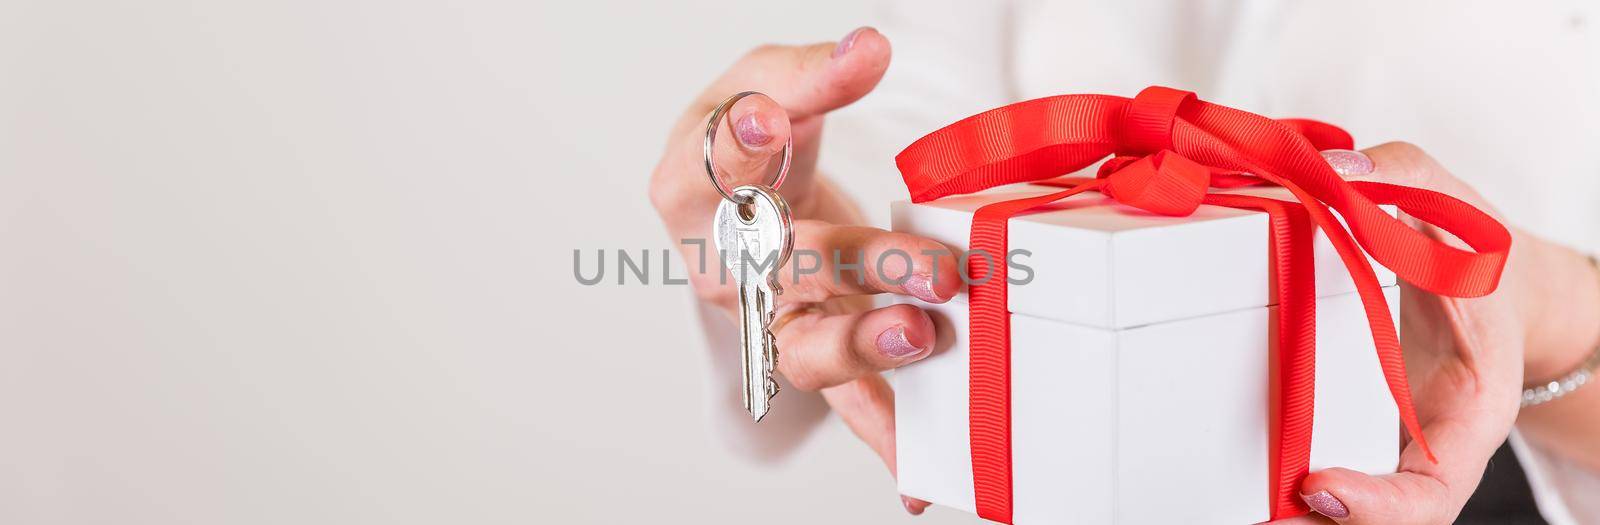 Female hands holding small gift with ribbon.